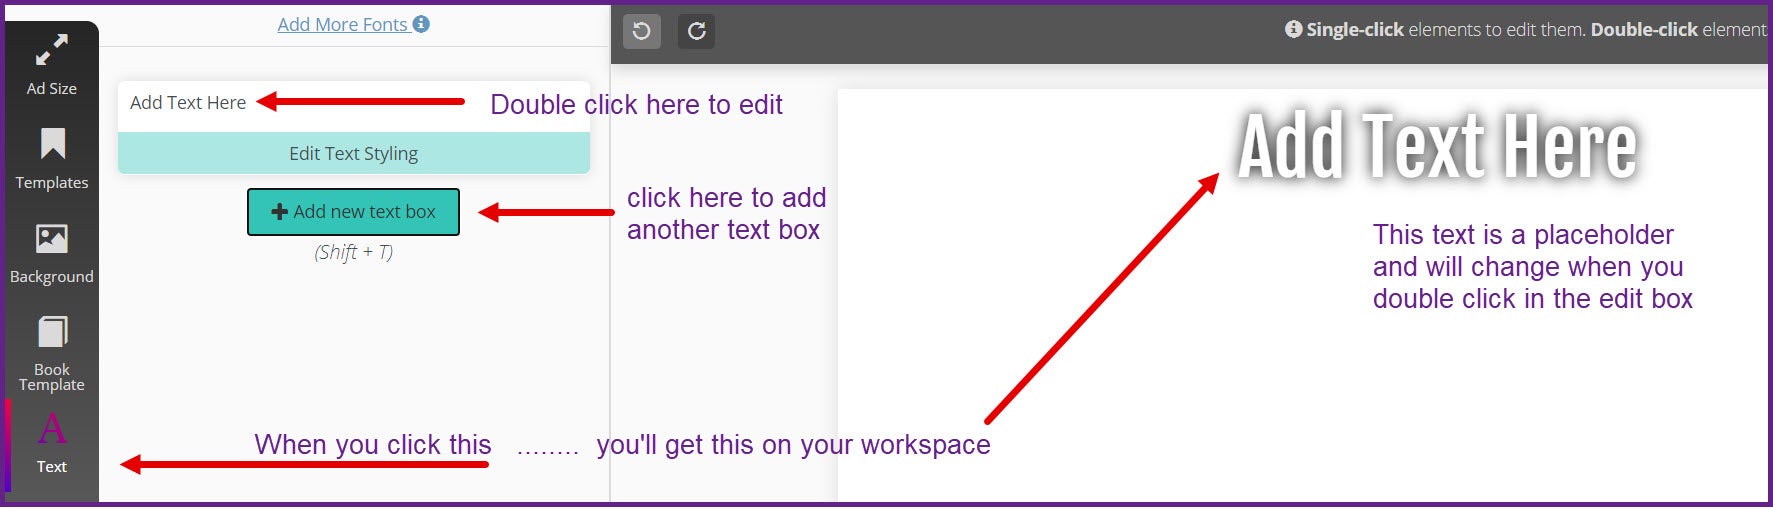 Image of the text box workspace